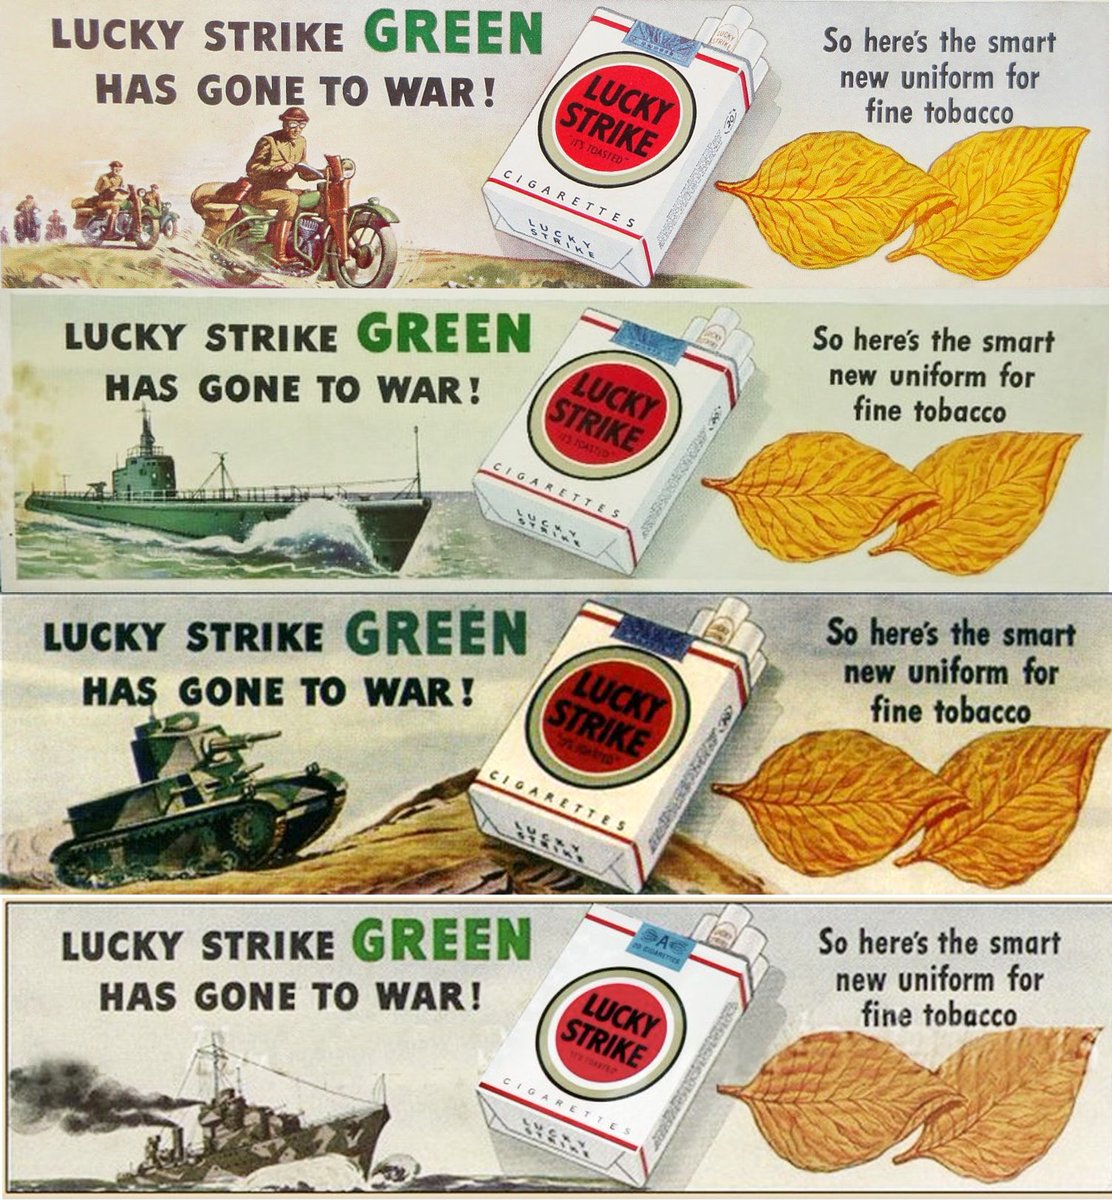 Lucky Strike adverts from a 1942 campaign launched after changing